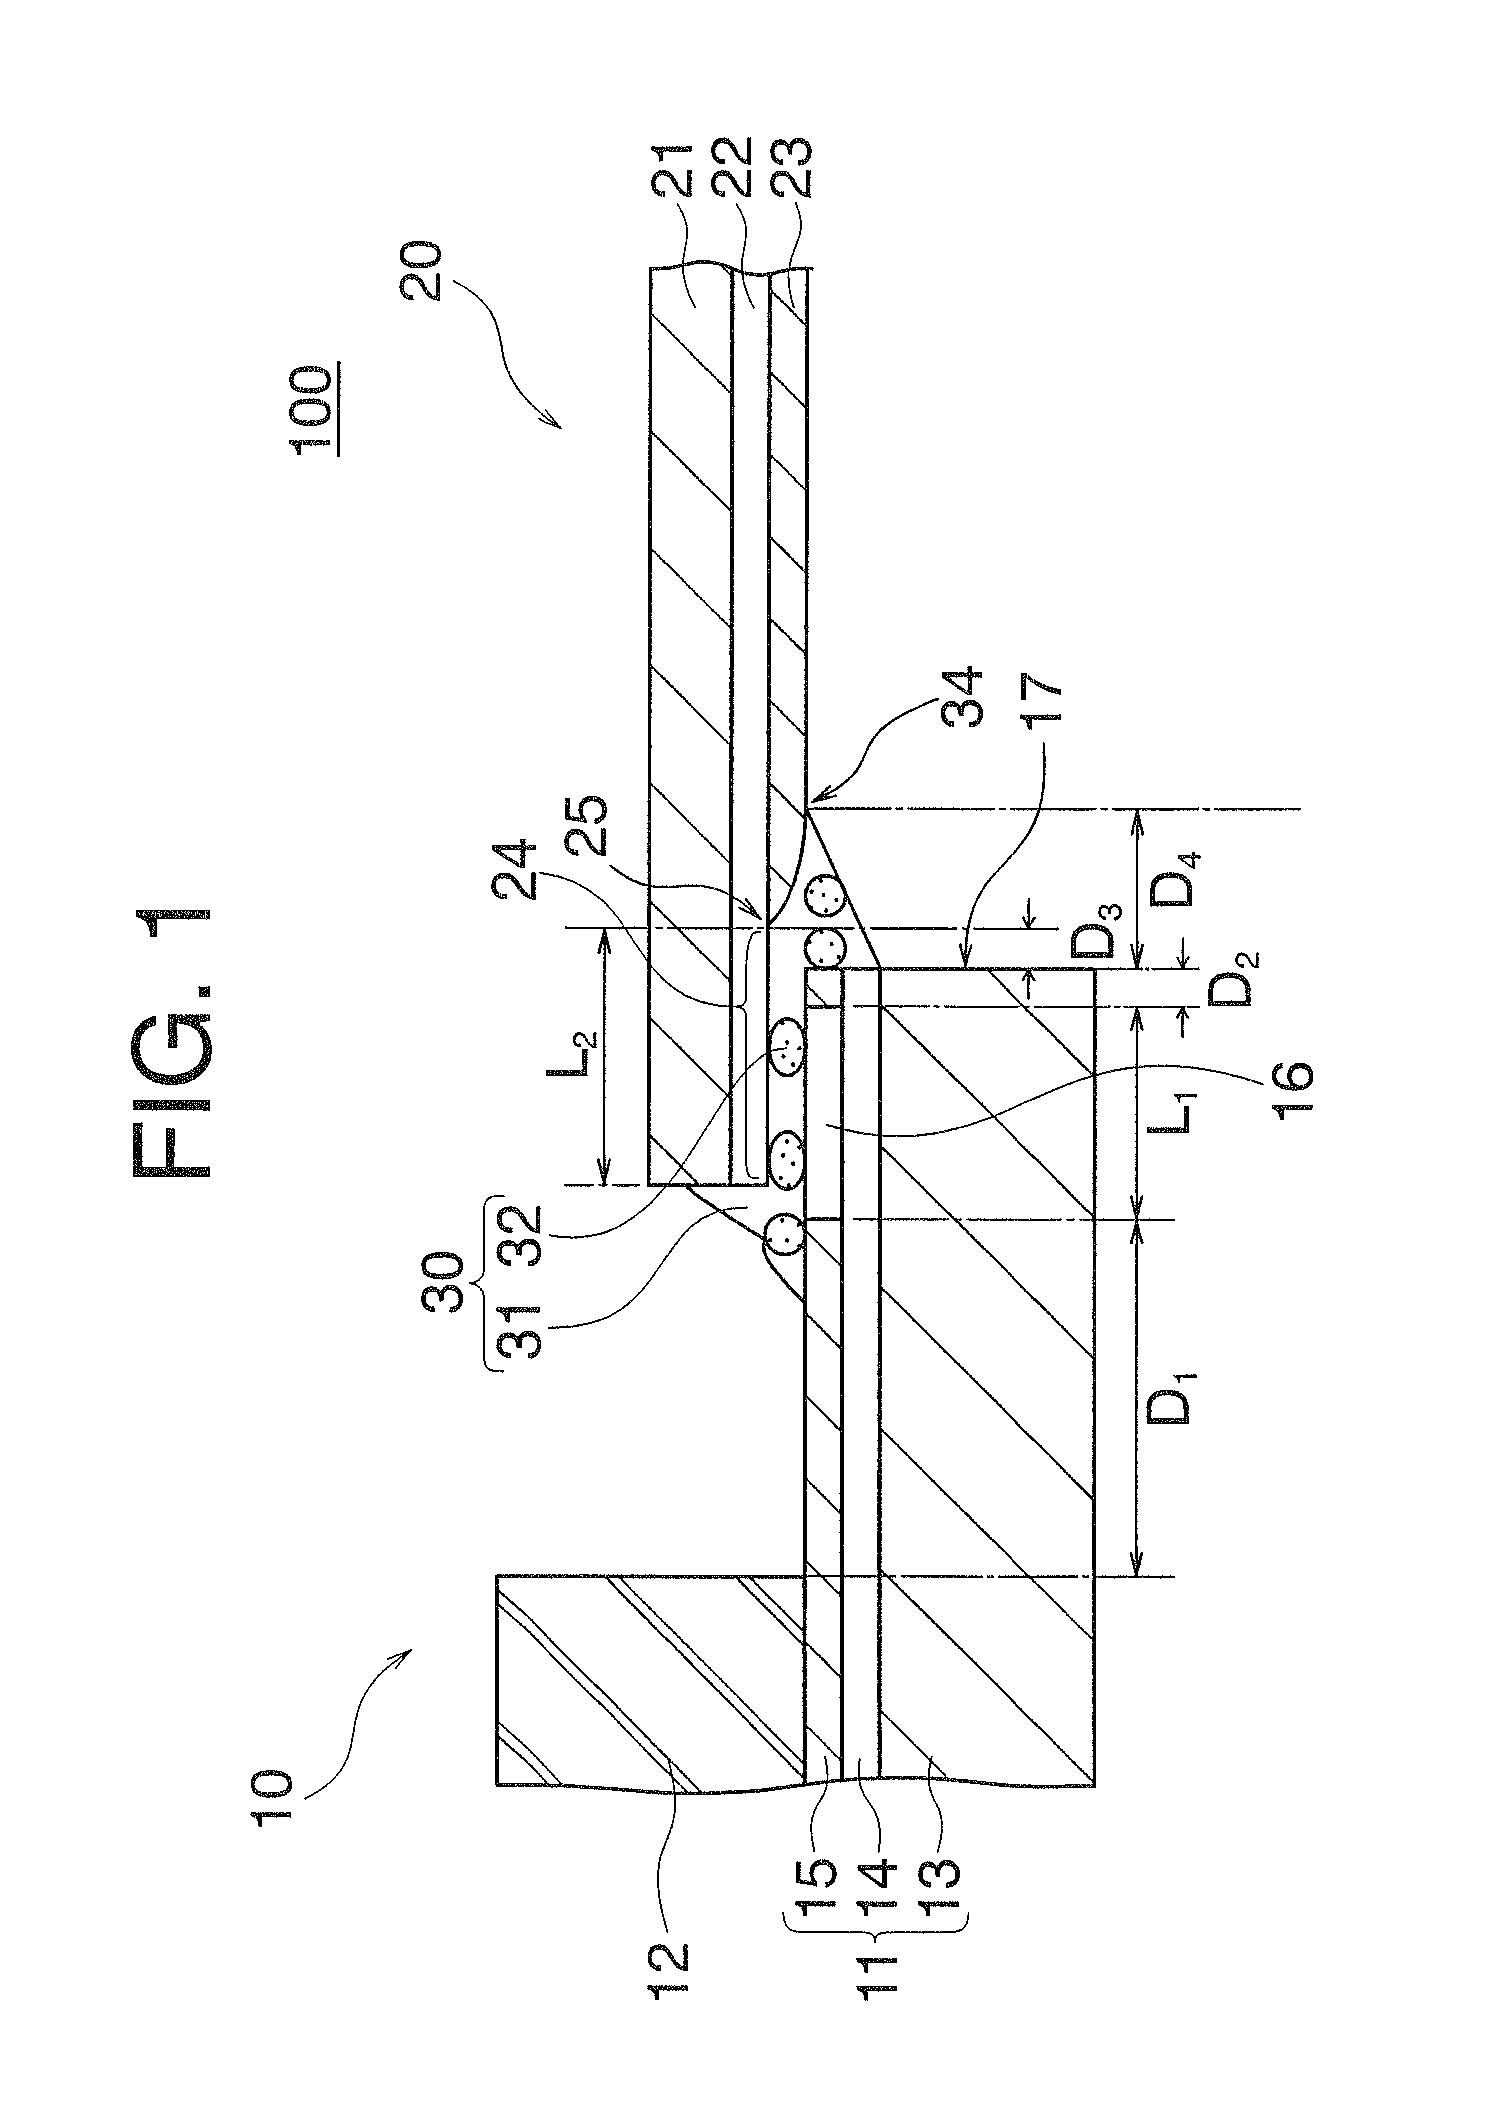 Display device having an anisotropic-conductive adhesive film